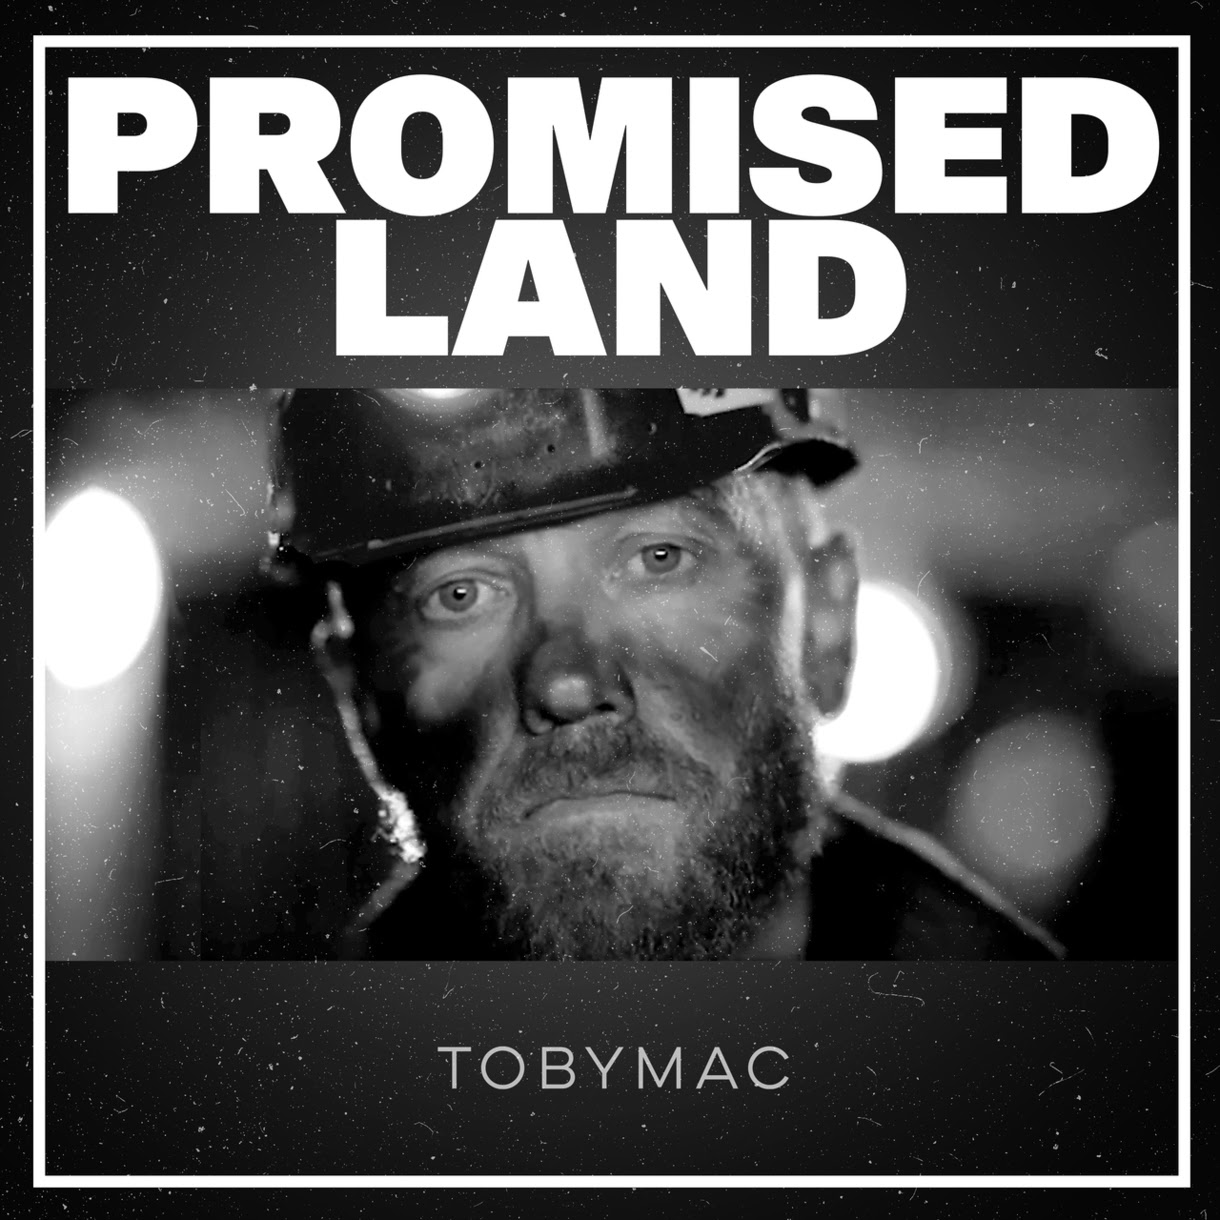 TobyMac (Image courtesy of The Media Collective)